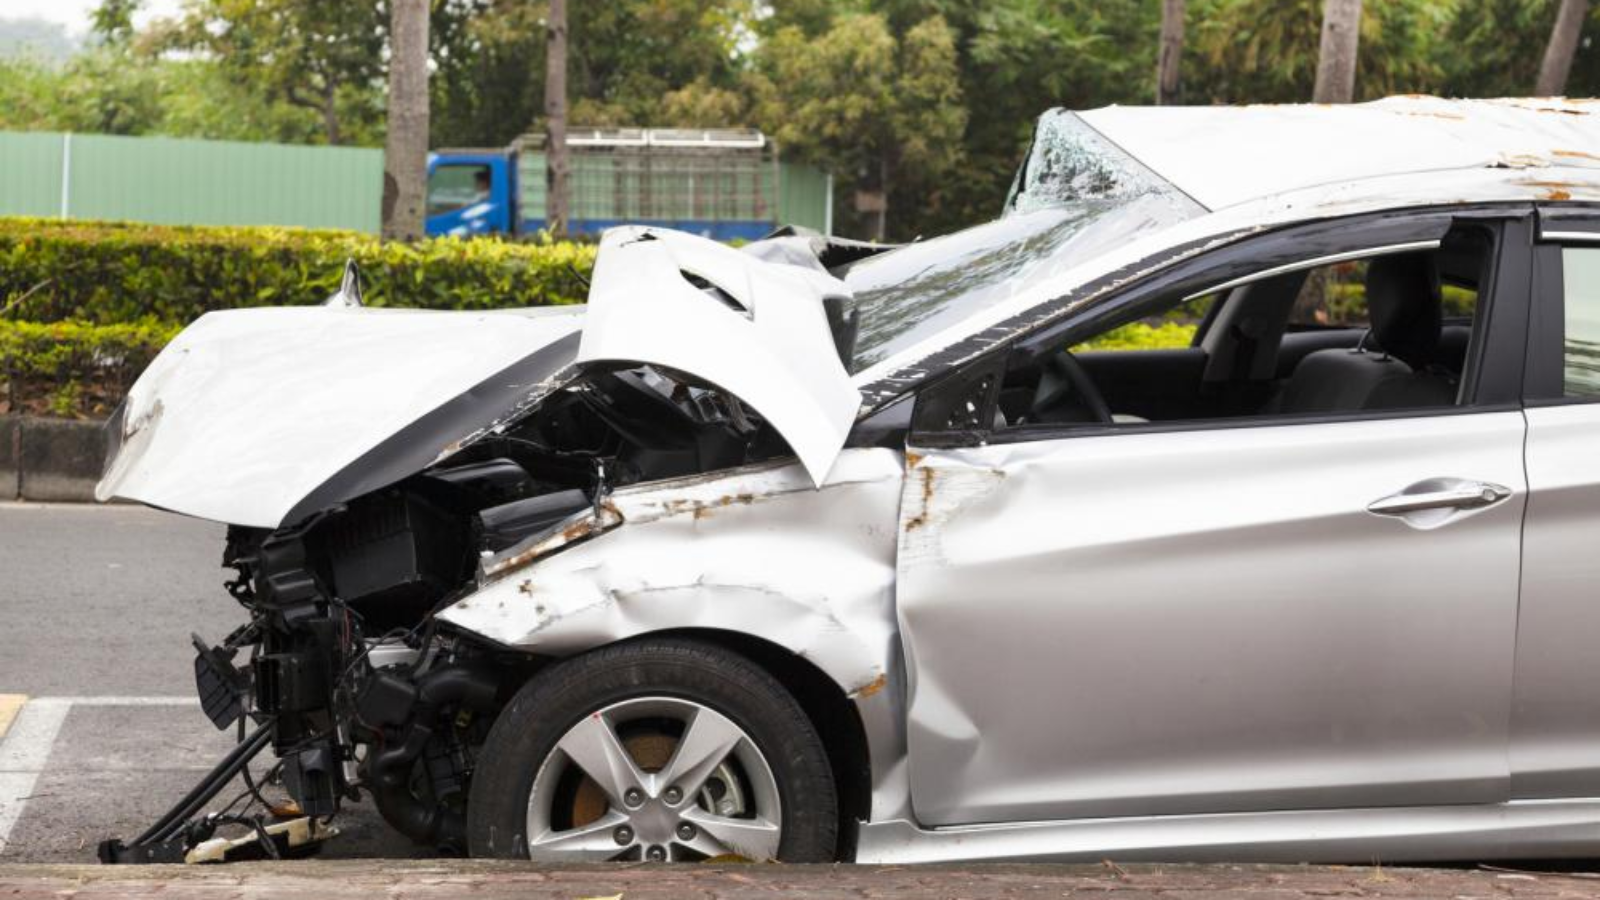 A damaged car after an accident on the road.